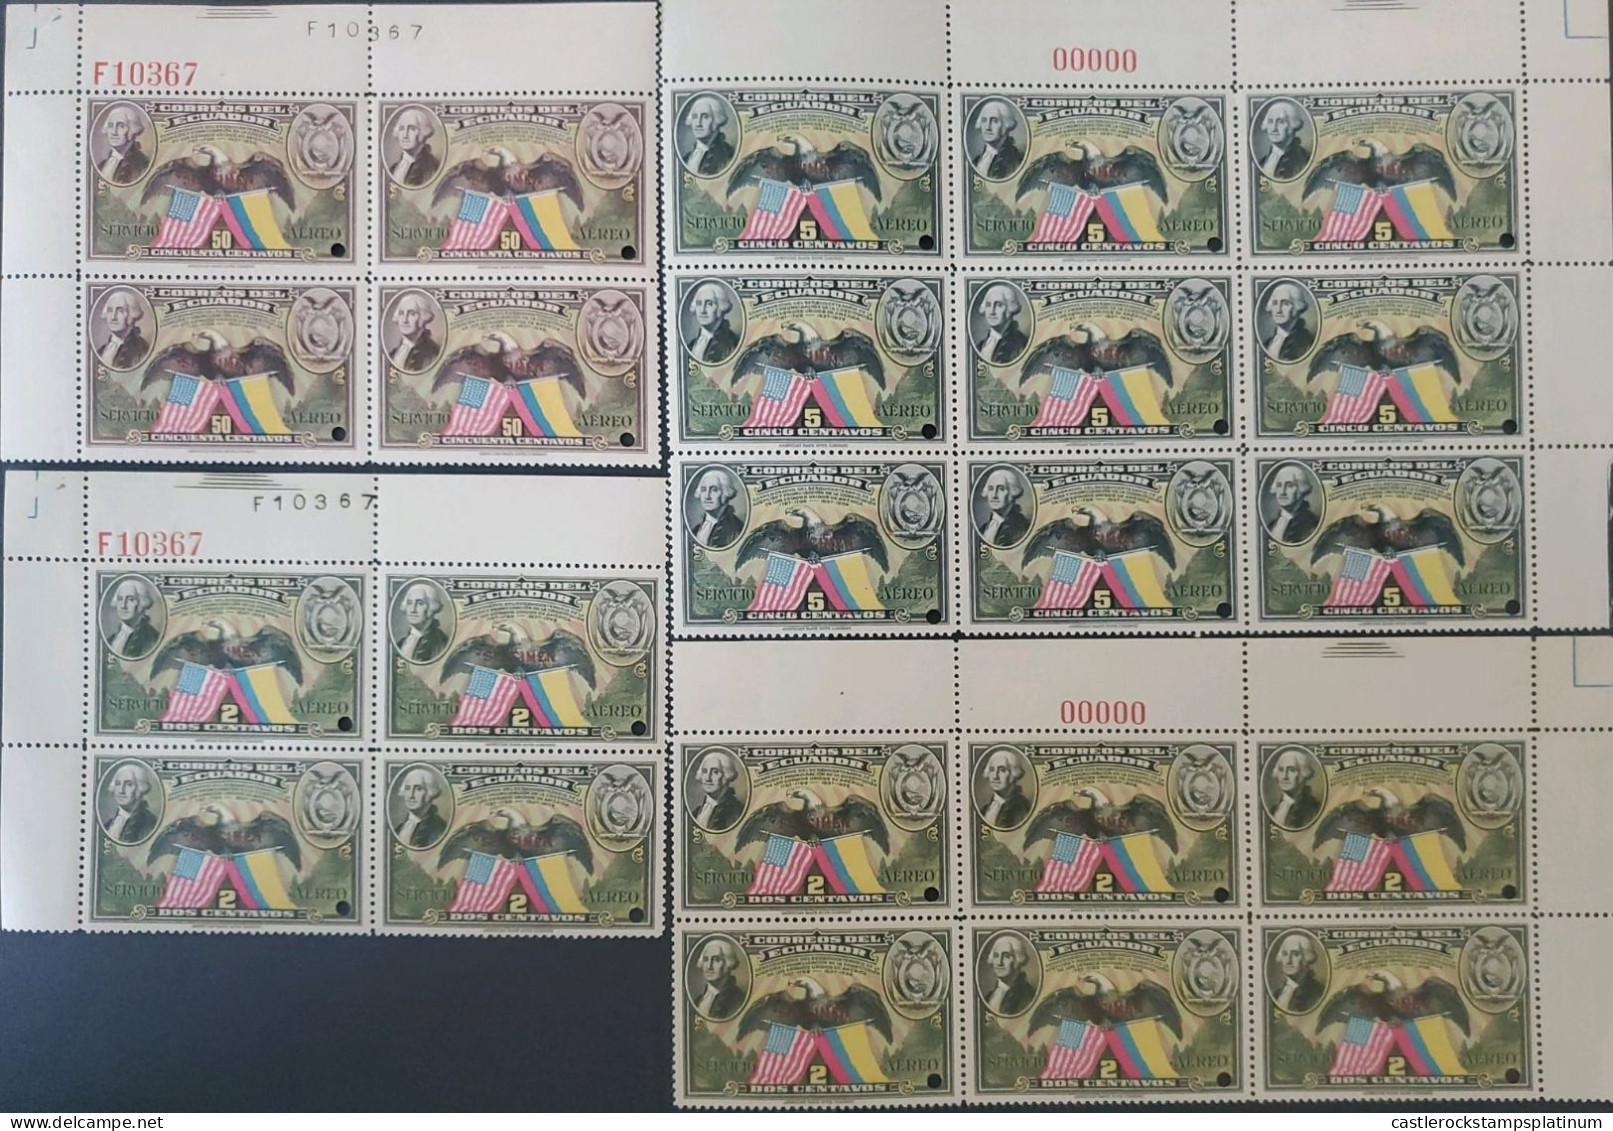 OH) 1938 ECUADOR, PUNCH, PORTRAIT WASHINGTON, AMERICAN EAGLE AND FLAGS,  WITH CONTROL NUMBER, MNH - Equateur